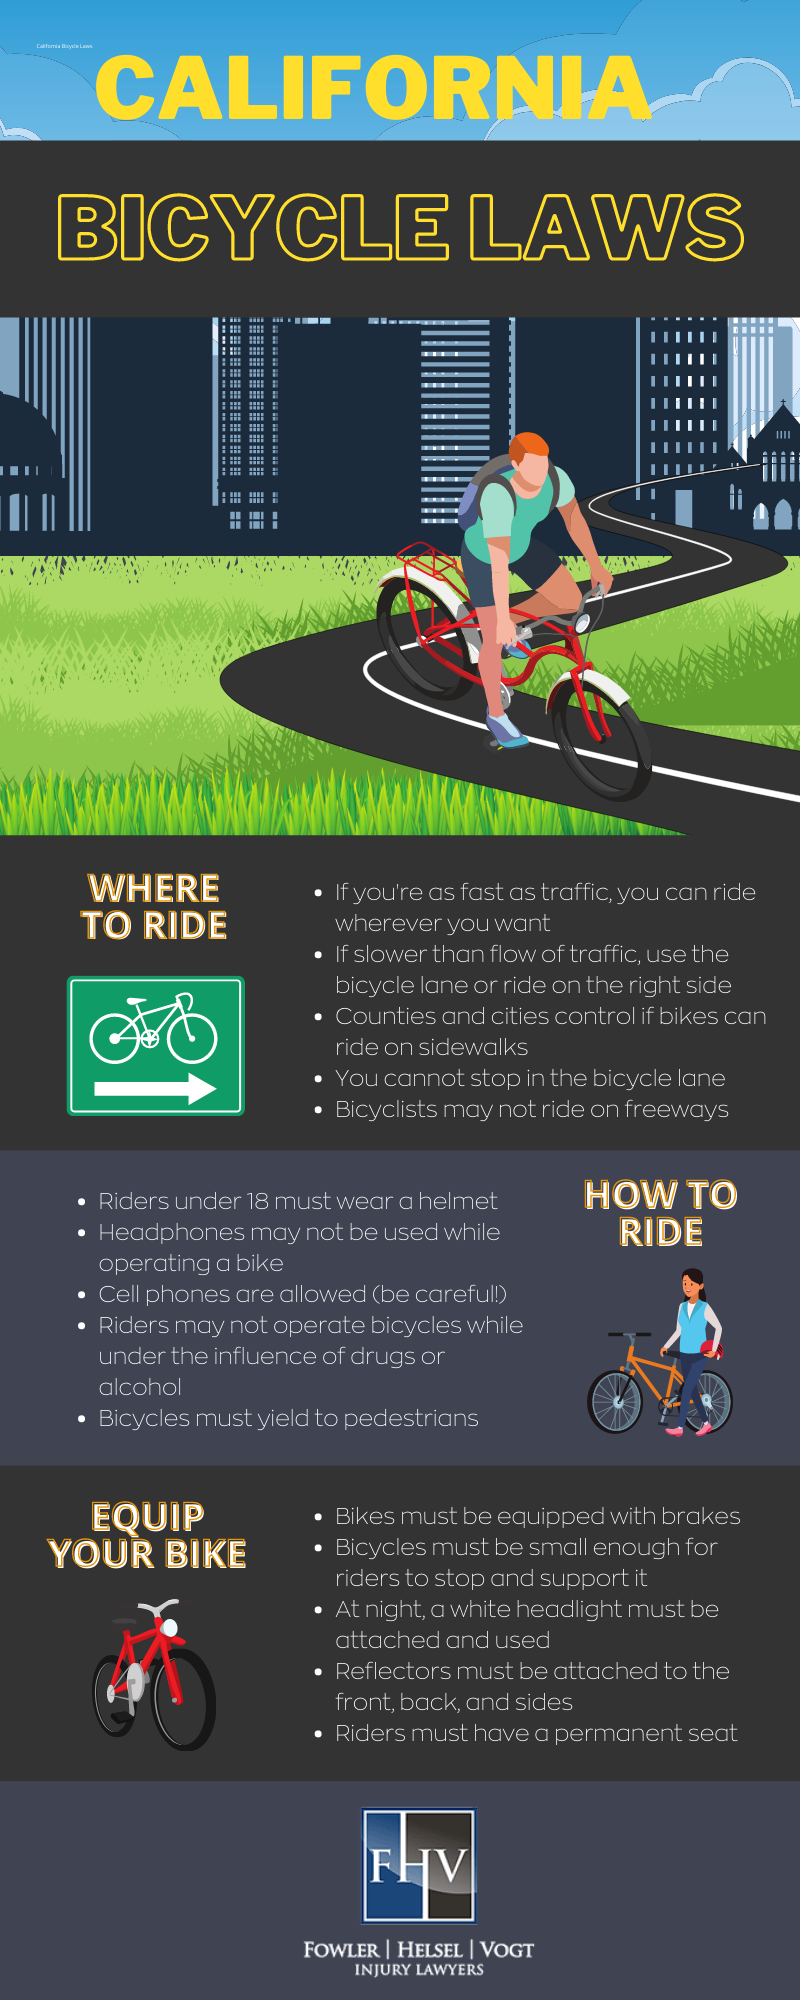 California bicycle laws infographic